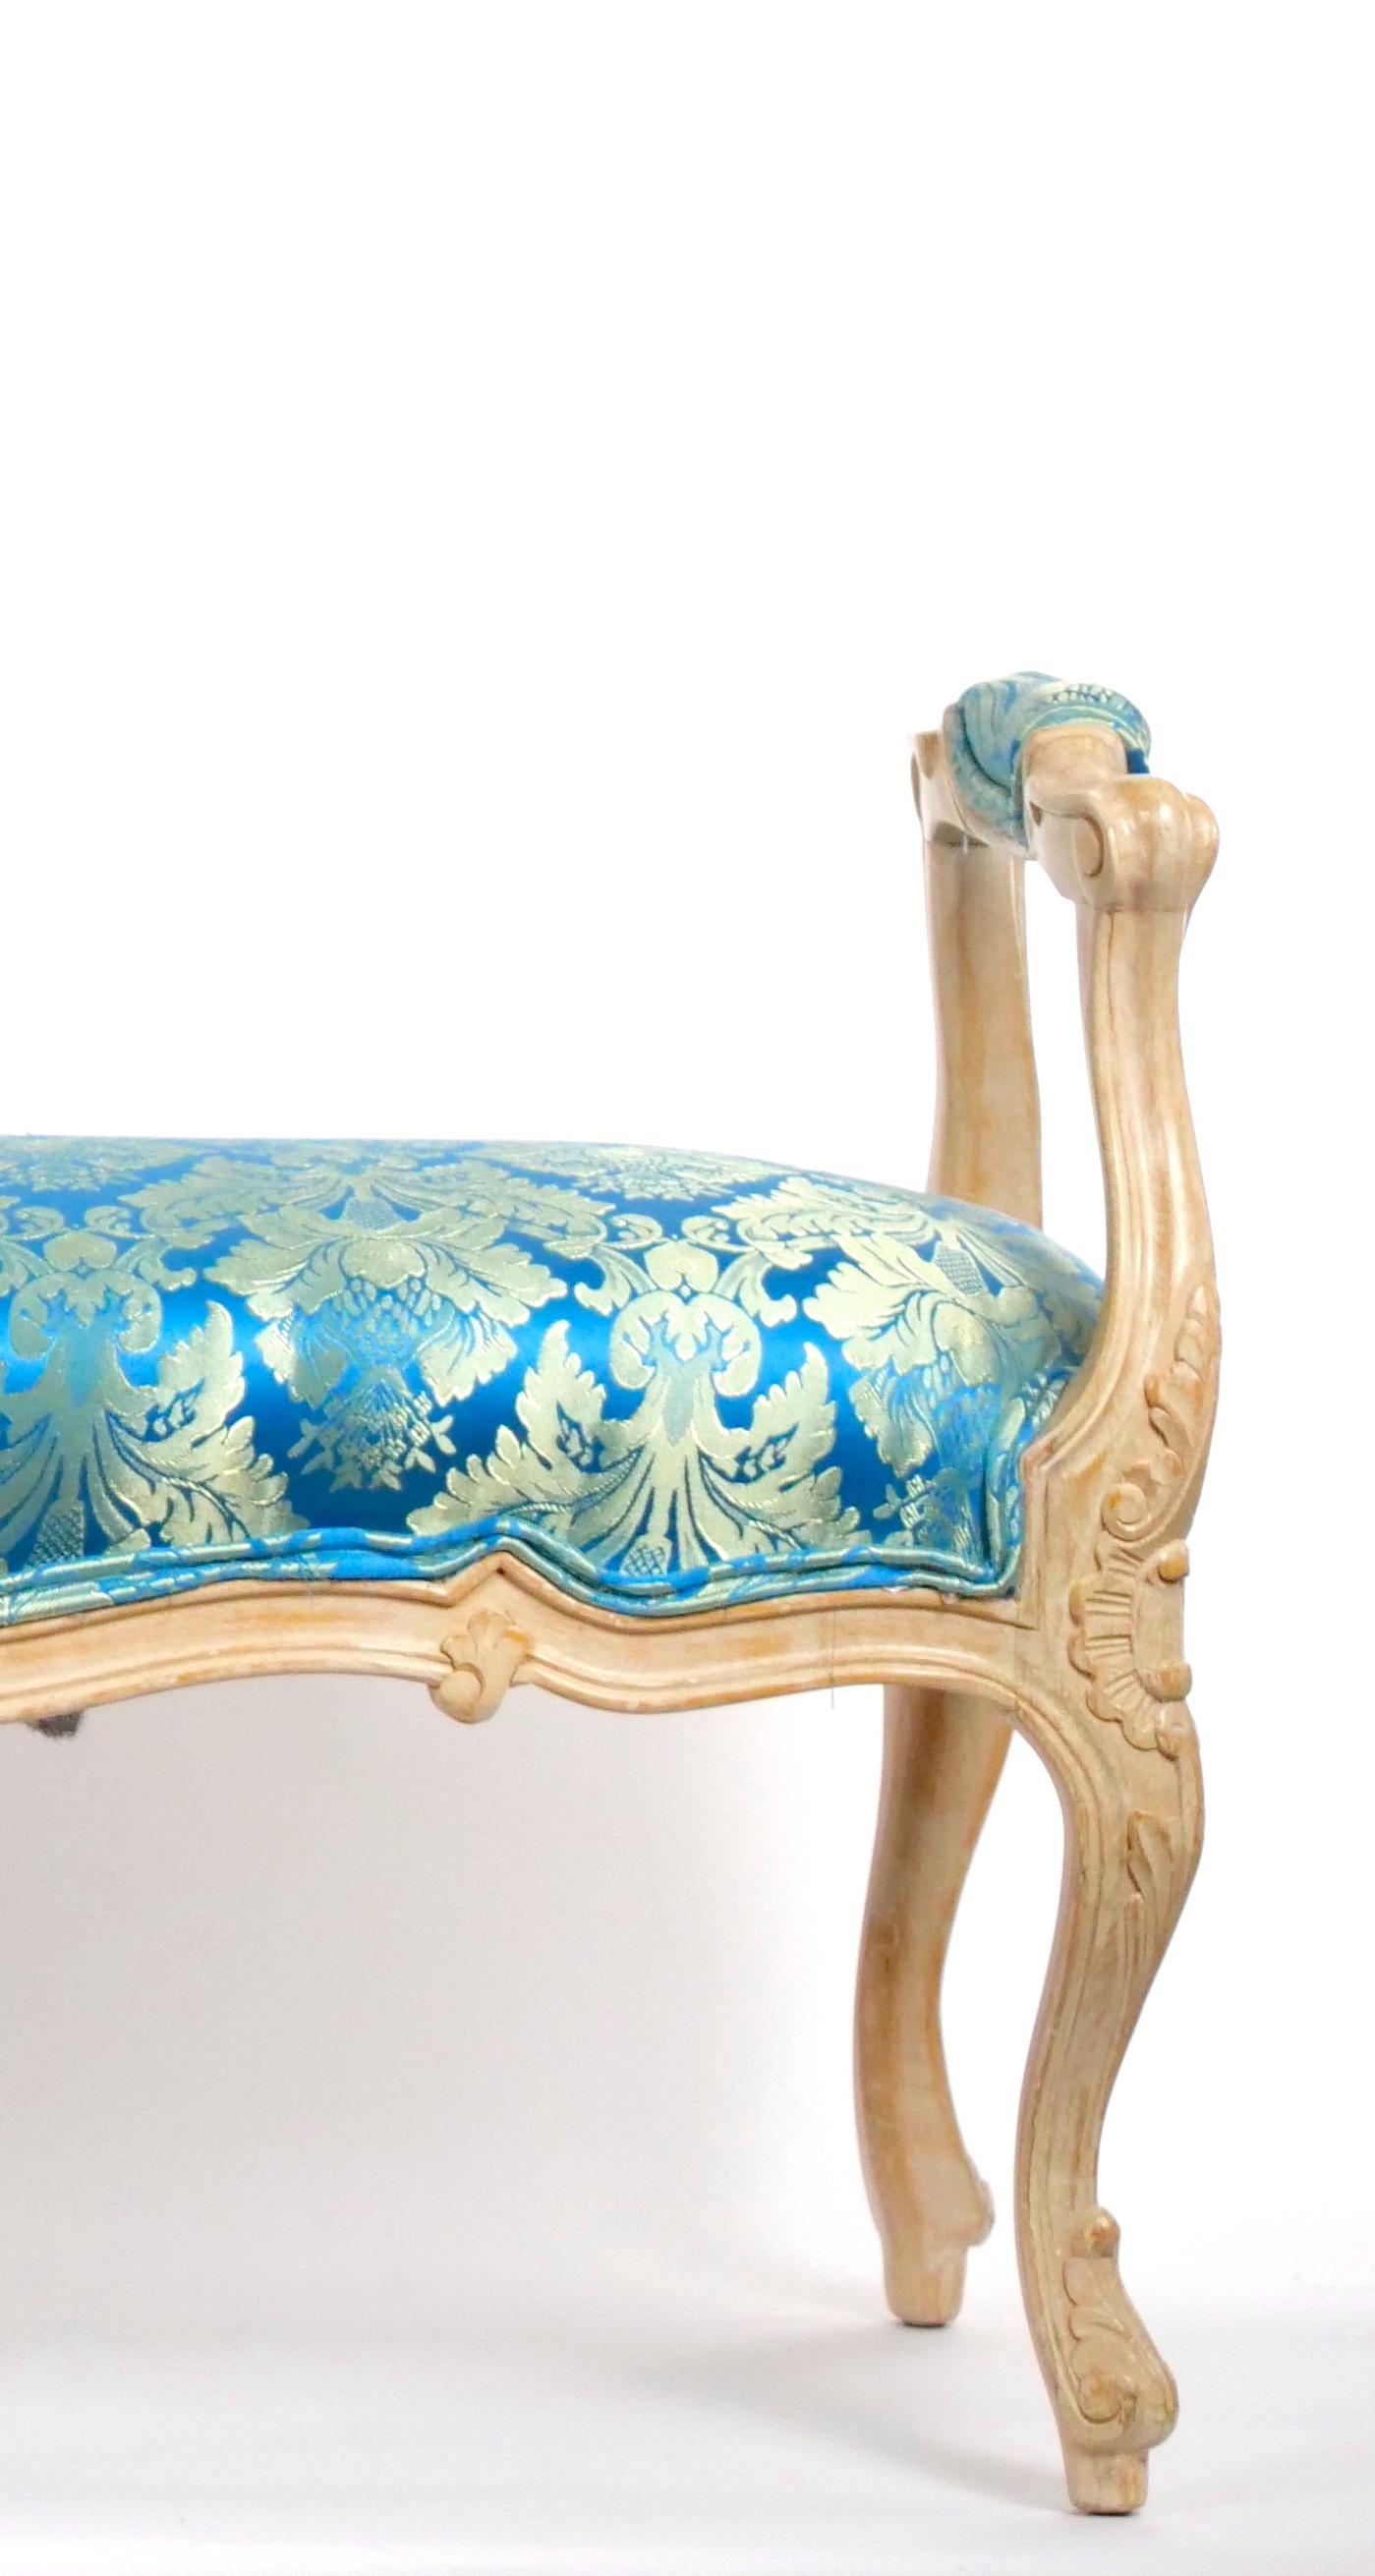 Italian Painted Wood Window Bench / Arms & Flute Carved Accents  / Upholstered Seat For Sale